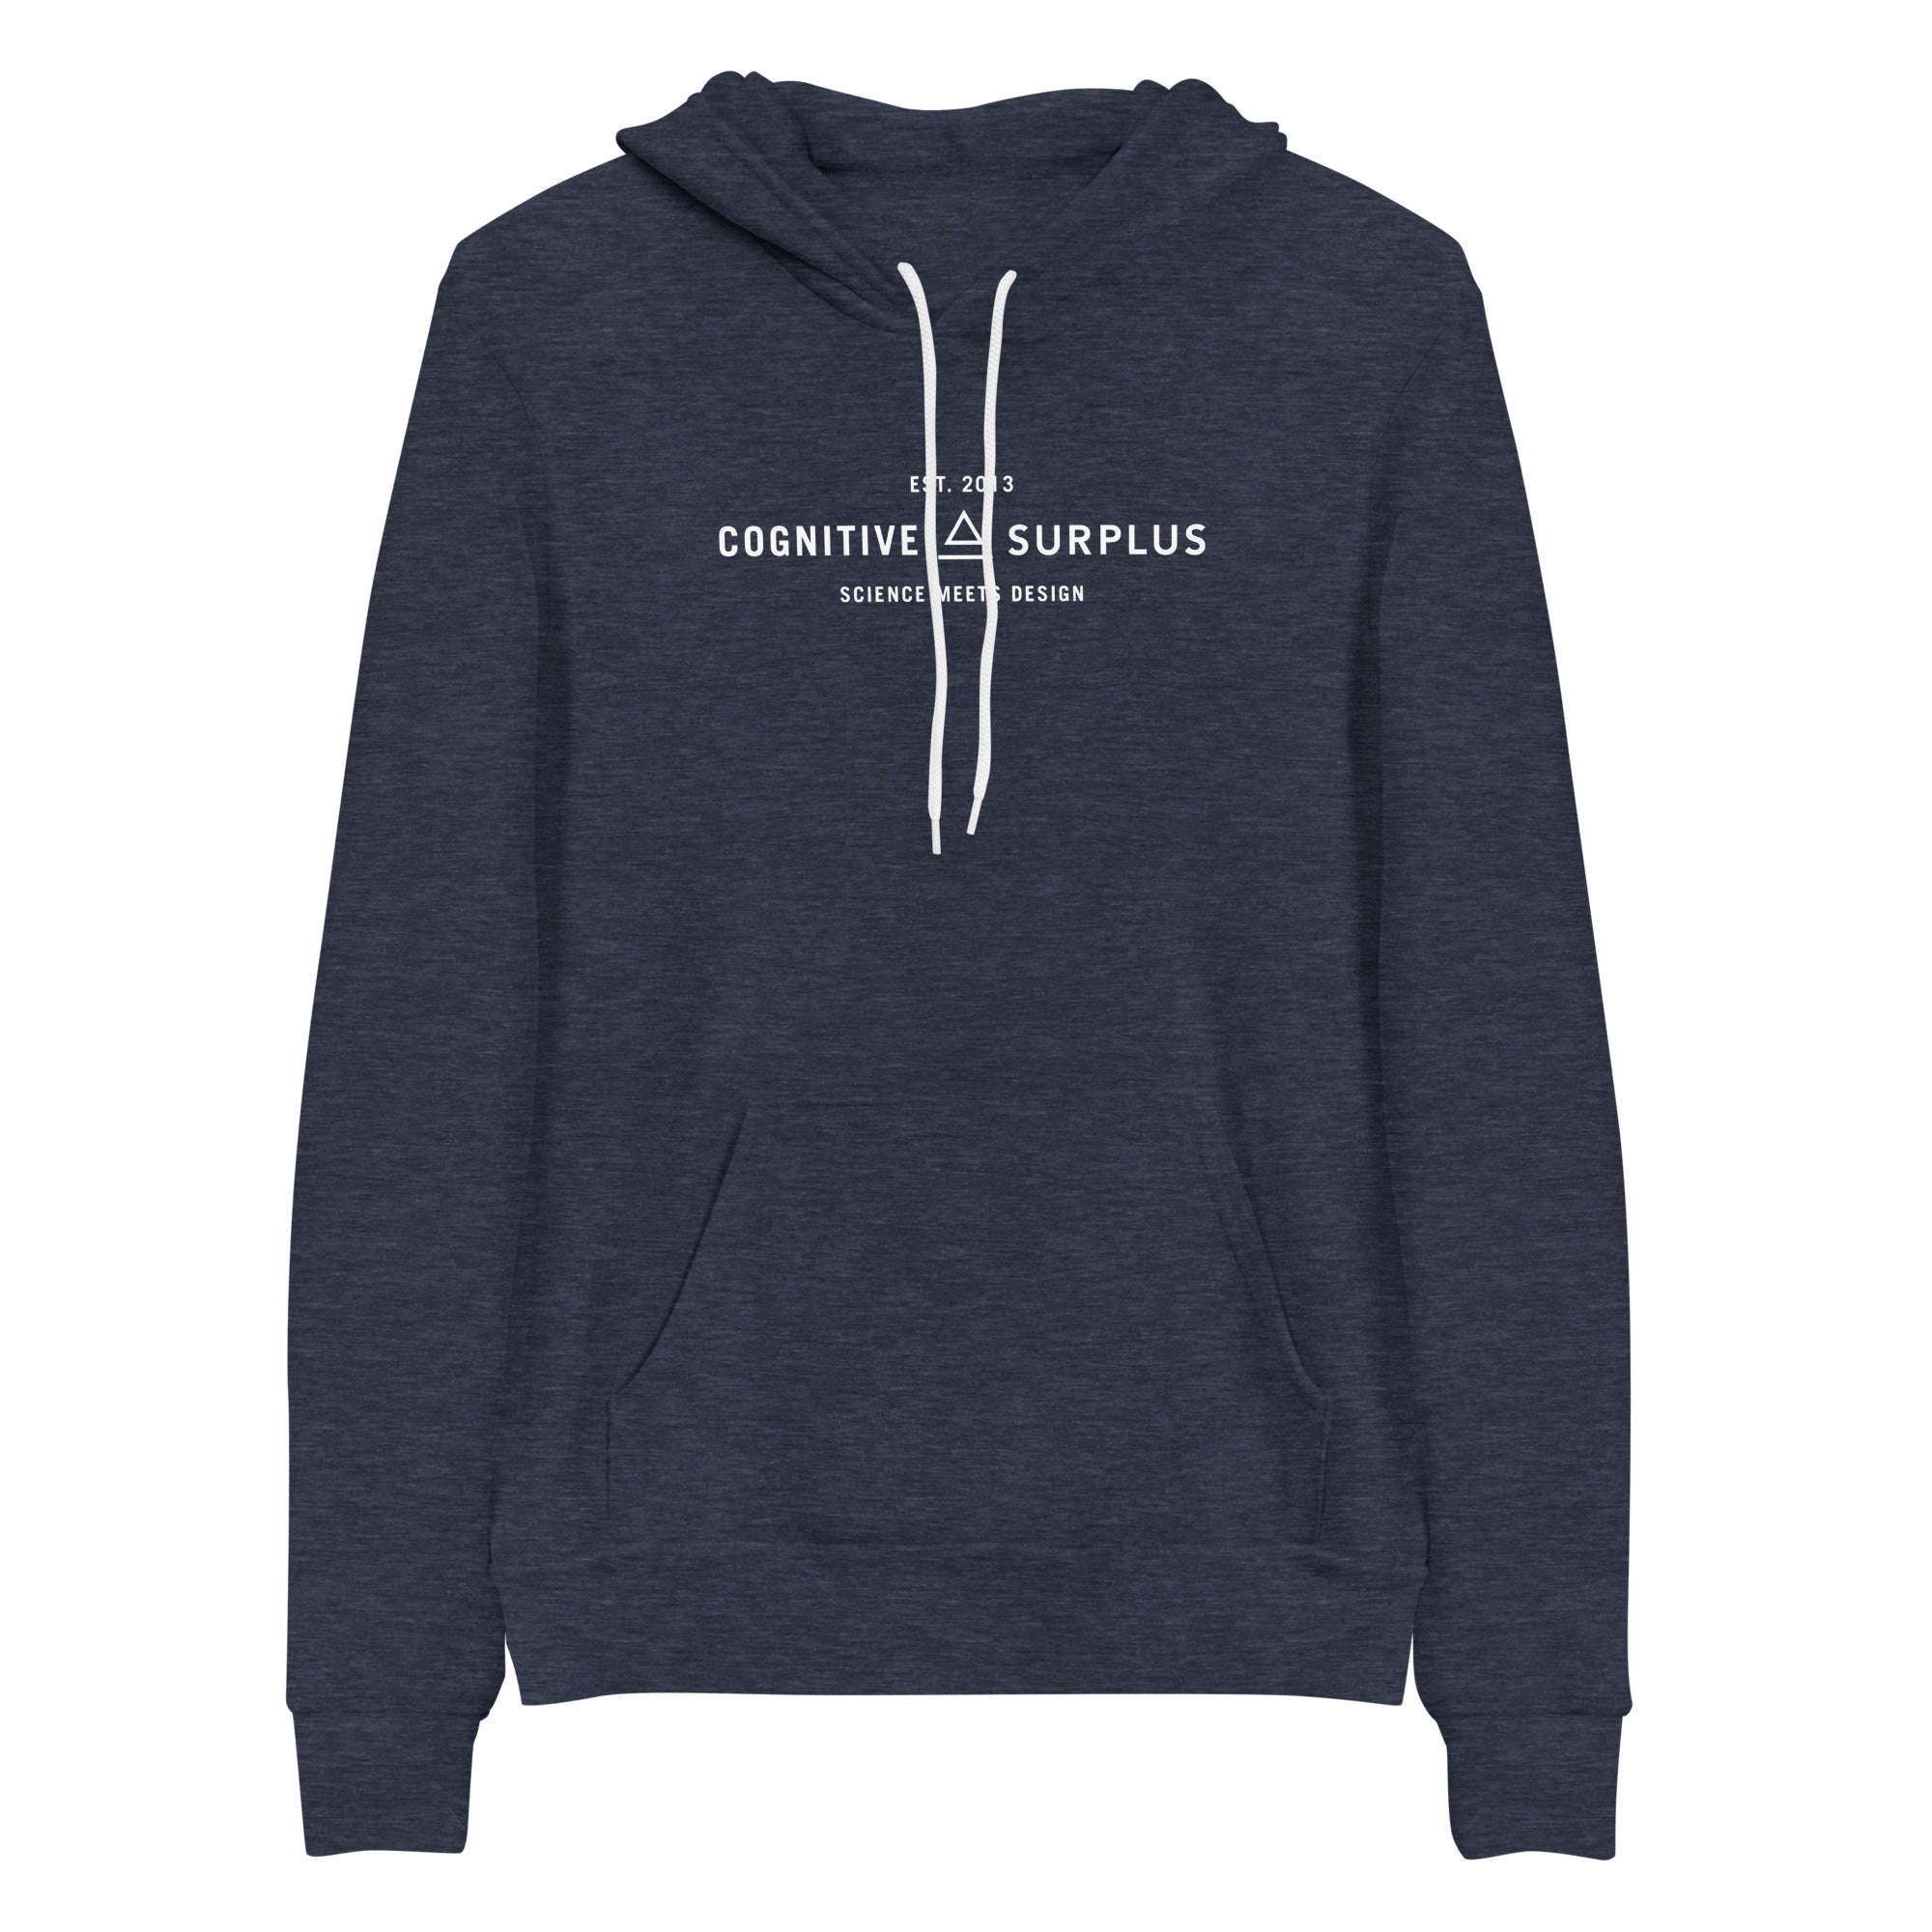 unisex-pullover-hoodie-heather-navy-front-656e659cd5134.jpg